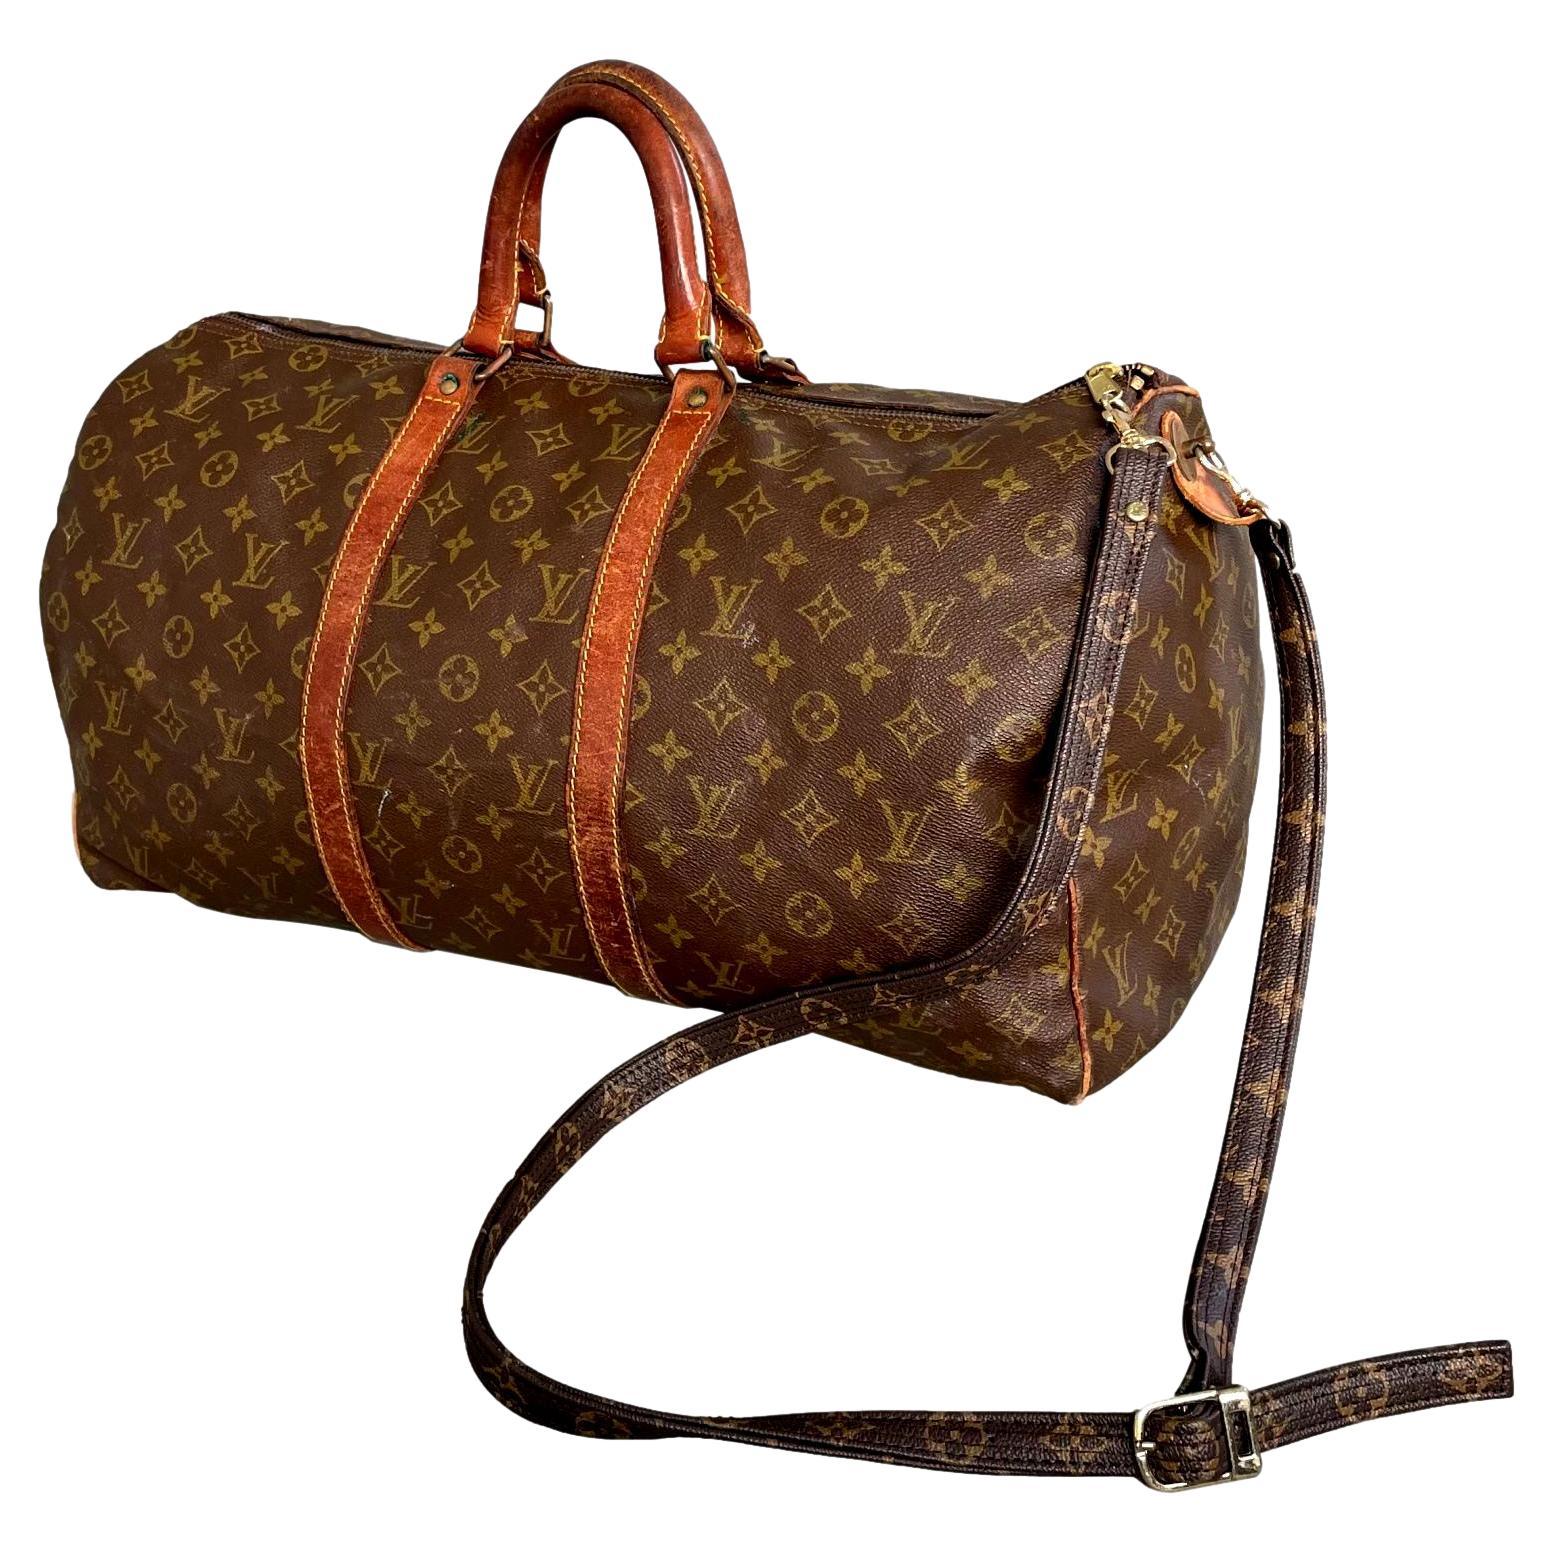 1950s Louis Vuitton Duffel Bag For Sale at 1stDibs  louis vuitton 1950's  bags, lv vintage duffle bag, louis vuitton saddle